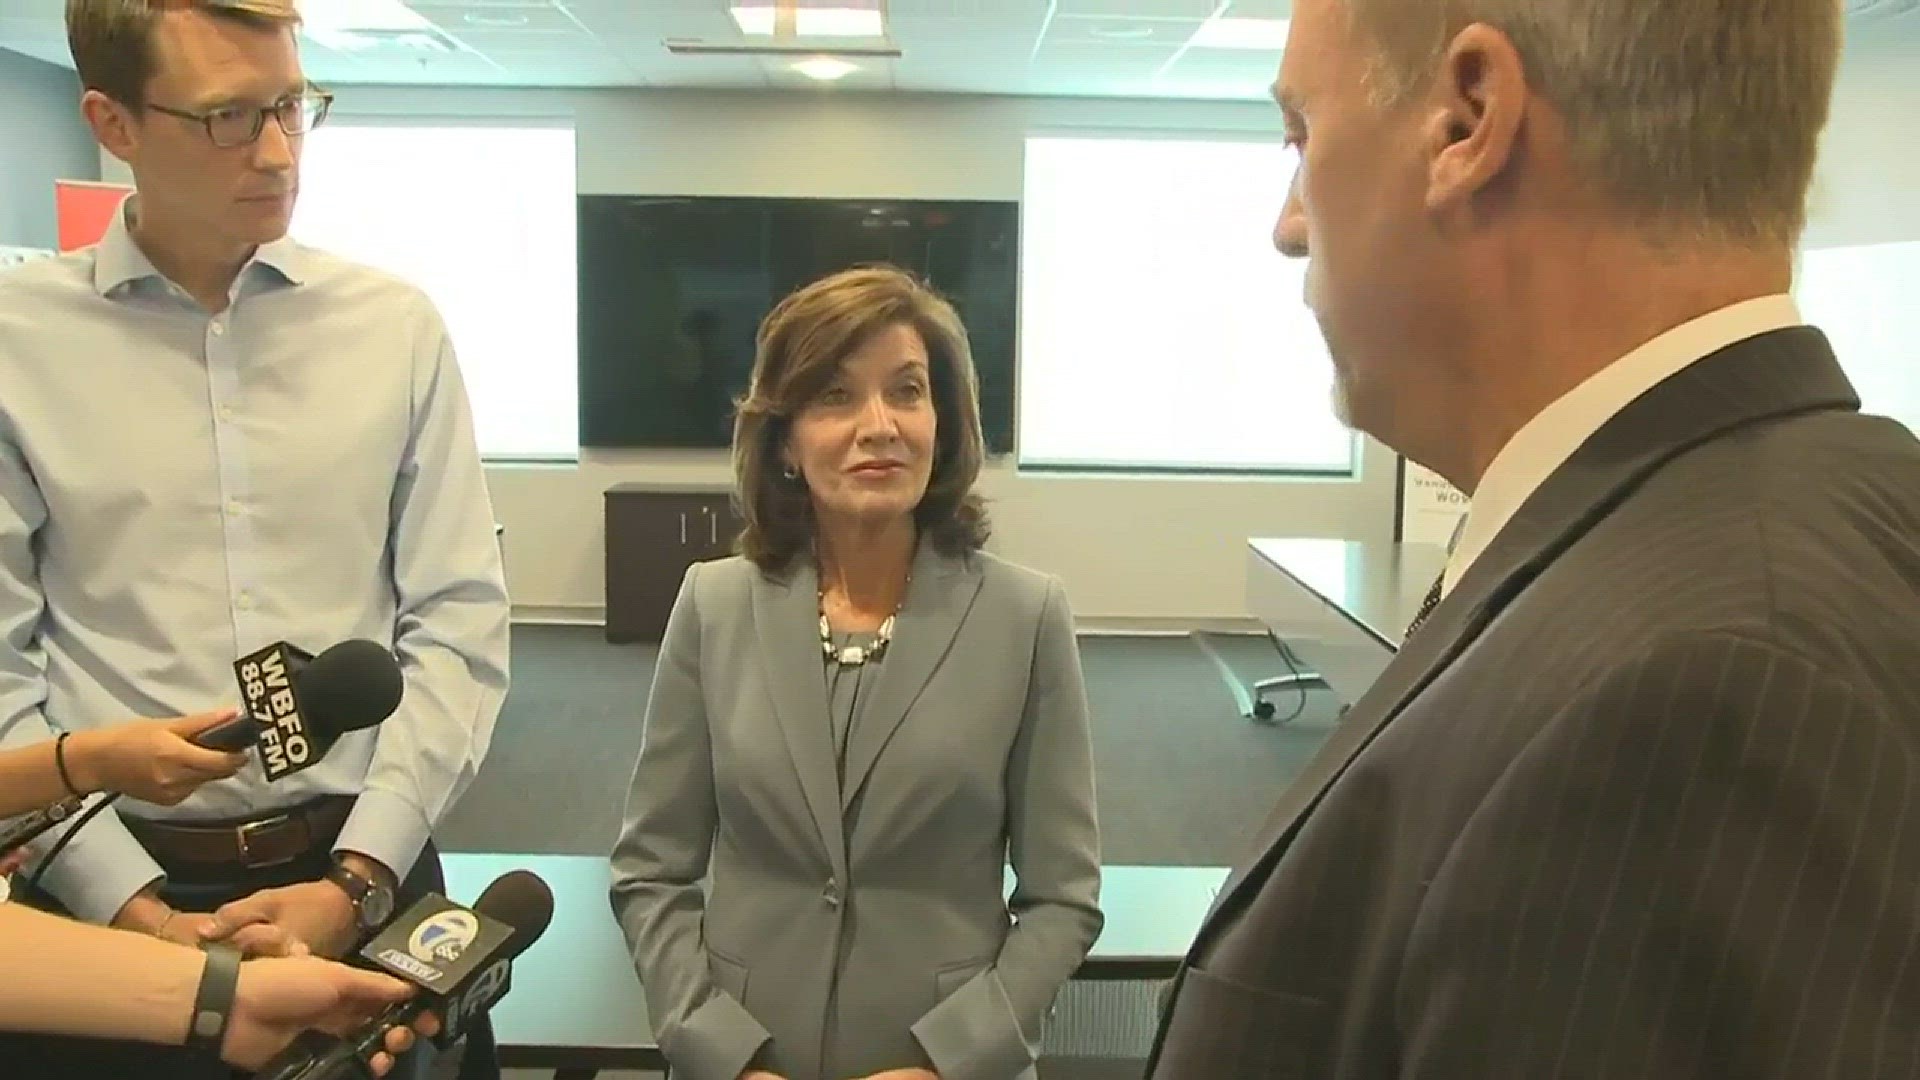 Two On Your Side's Dave McKinley spoke with Lt. Gov. Kathy Hochul in Buffalo on Wednesday morning.